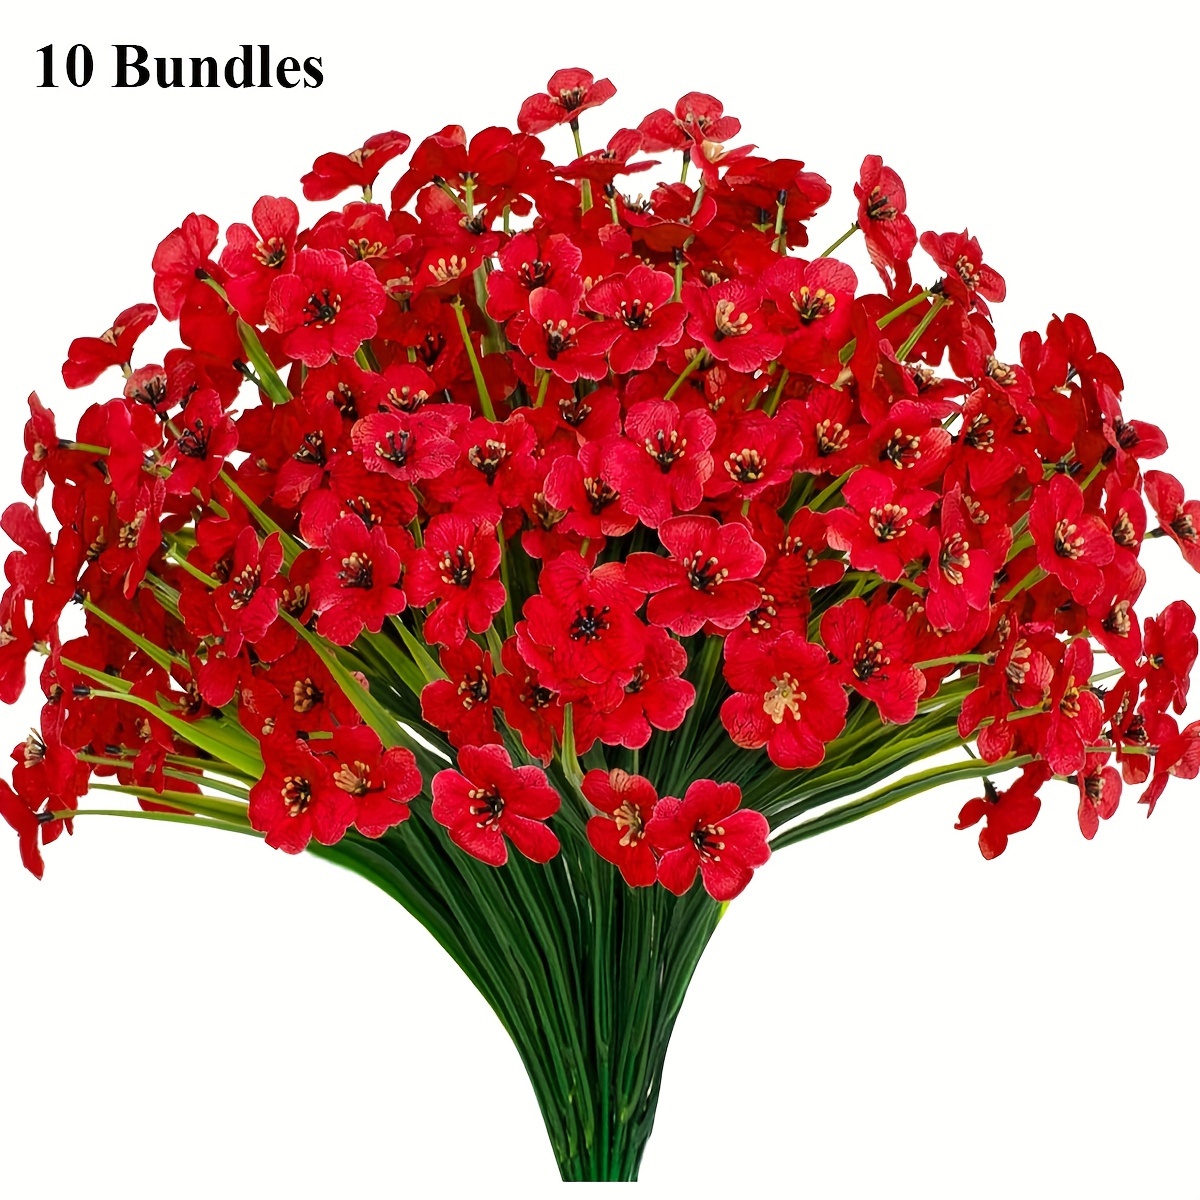 

10 Bundles Artificial Outdoor Flowers, Uv Resistant Fake Flowers, Faux Flower Plant, Greenery Shrubs Garden Porch Window Box Decor, Spring Summer Home Decor (red/purple/yellow/white)